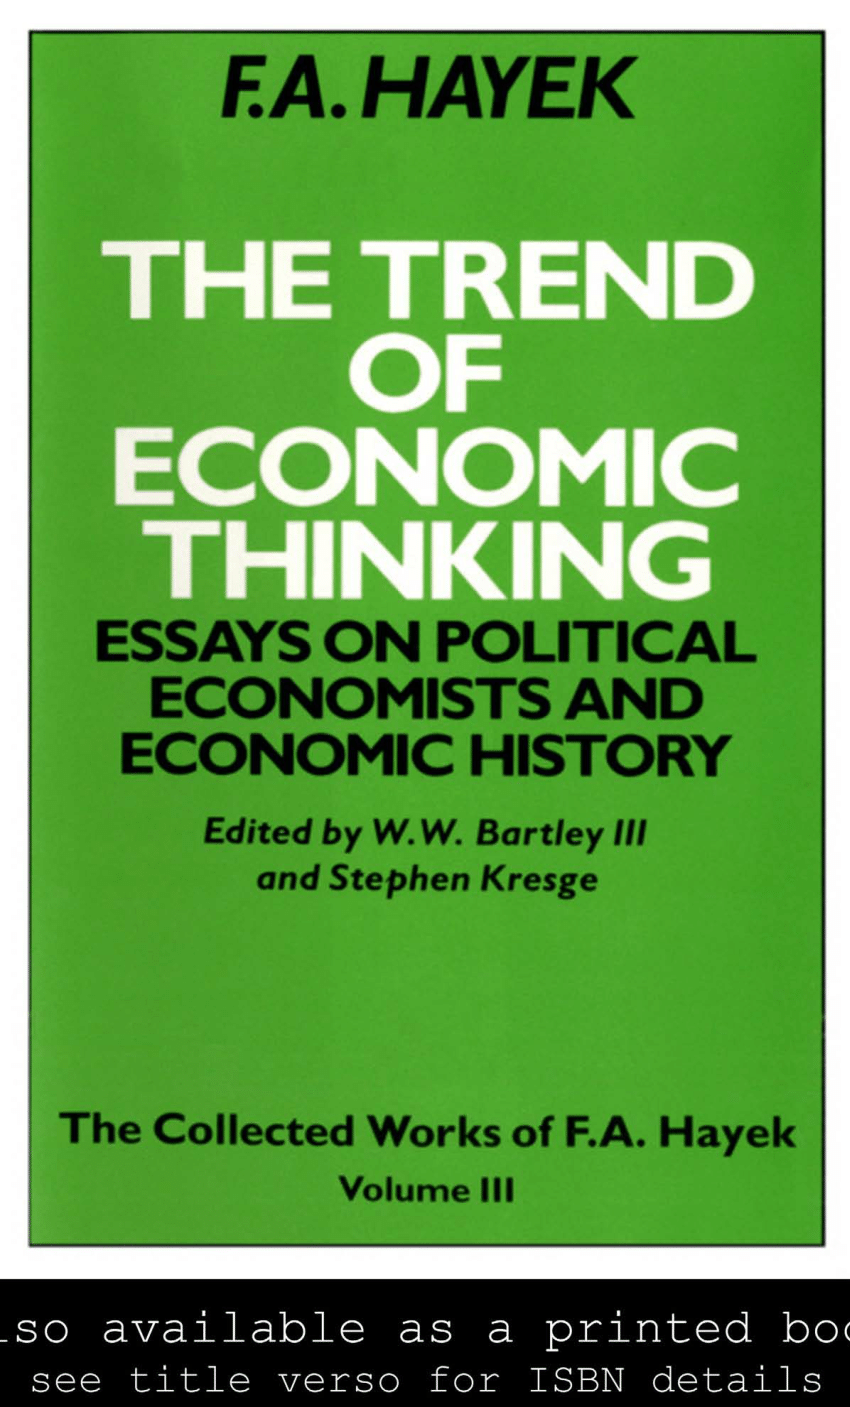 (PDF) Book Review: The Trend of Economic Thinking-Essays on Political ...